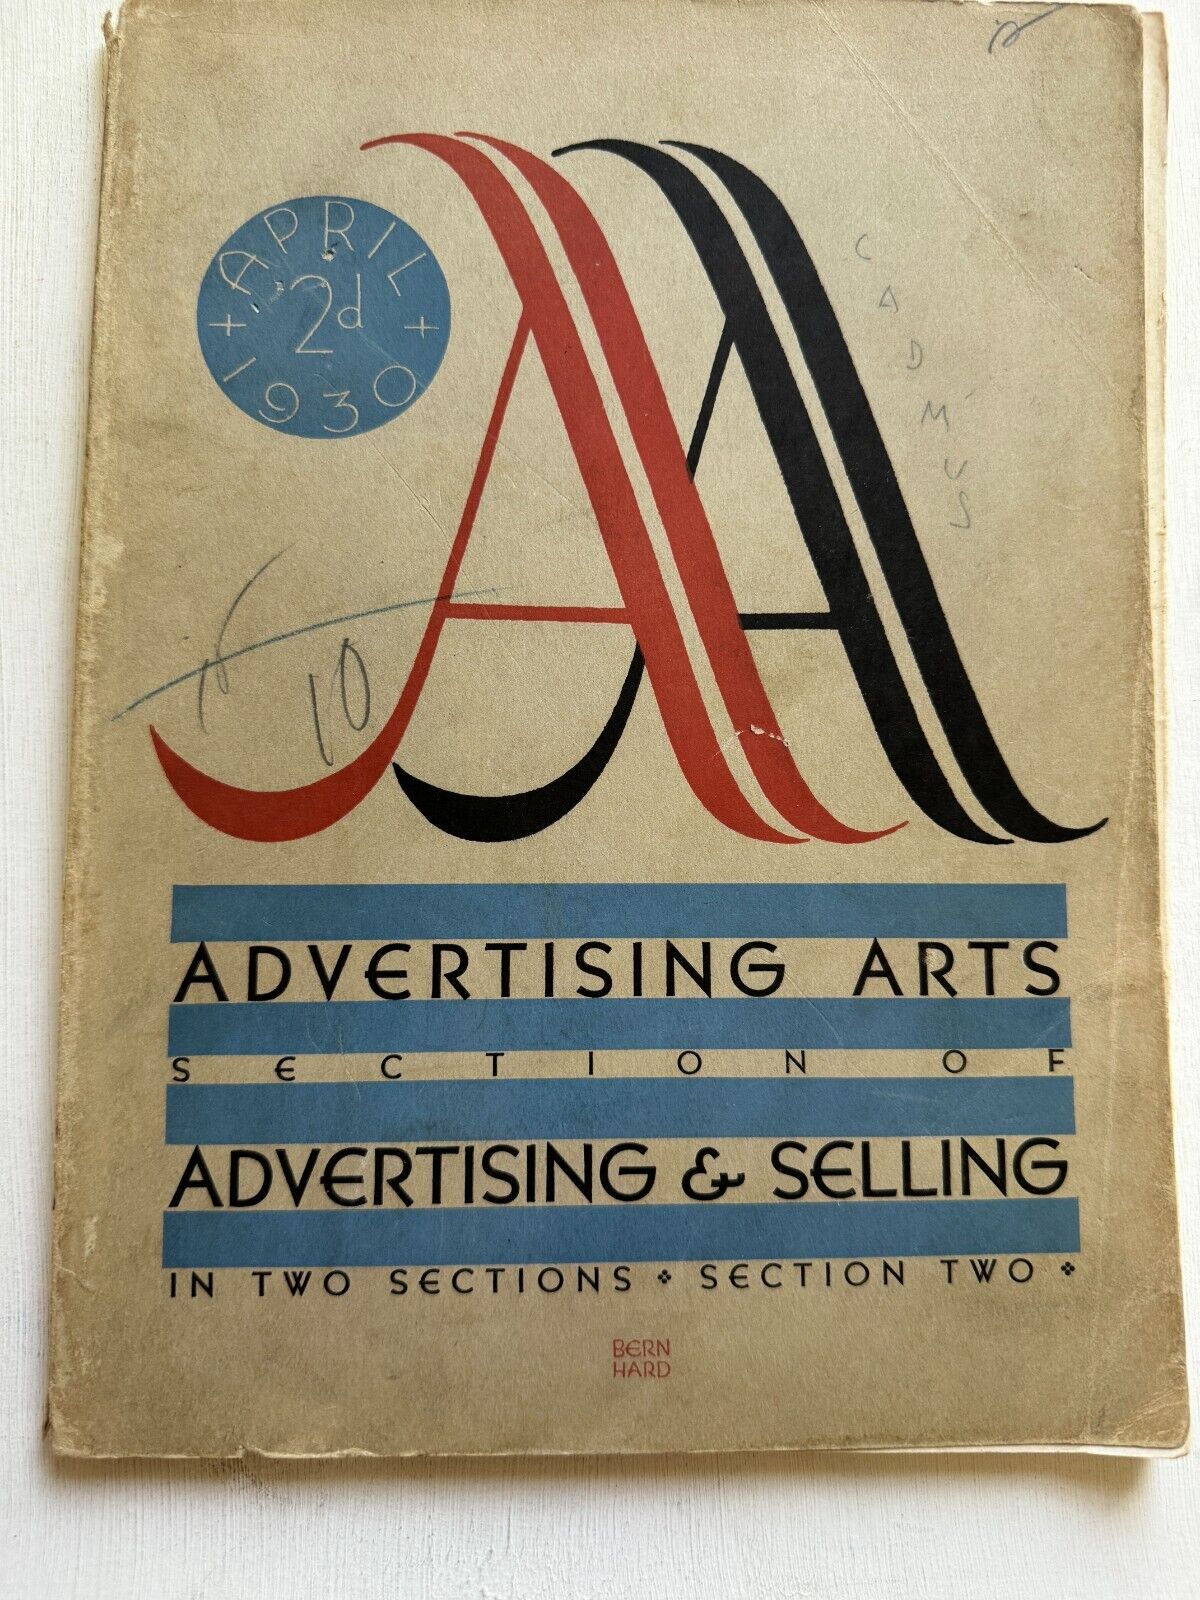 April 1930 Advertising Art Magazine w. Lots of Great Deco Ads